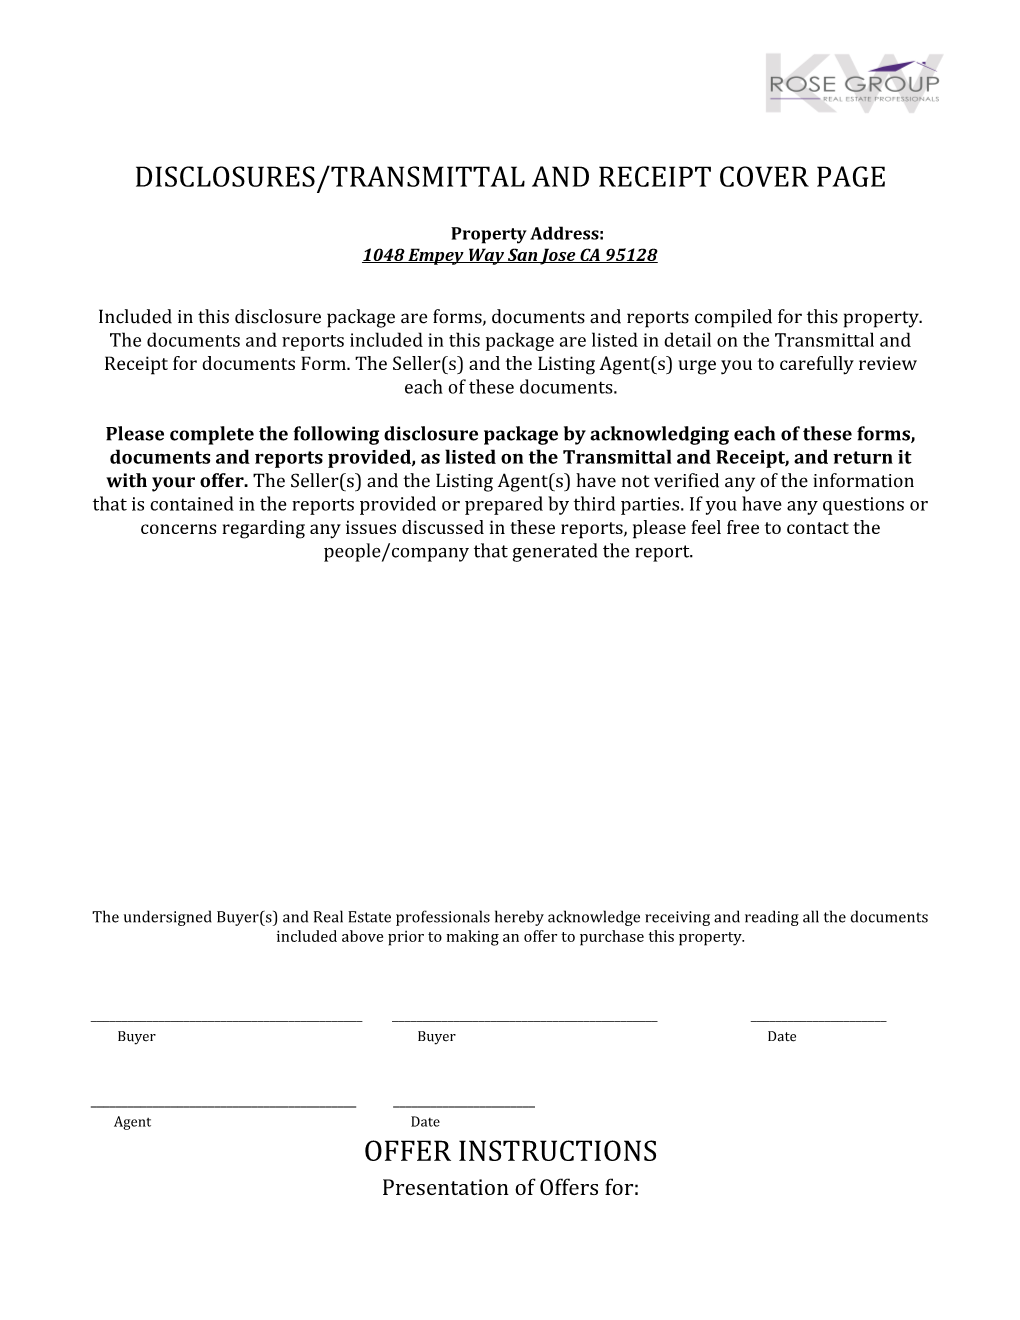 Disclosures/Transmittal and Receiptcover Page